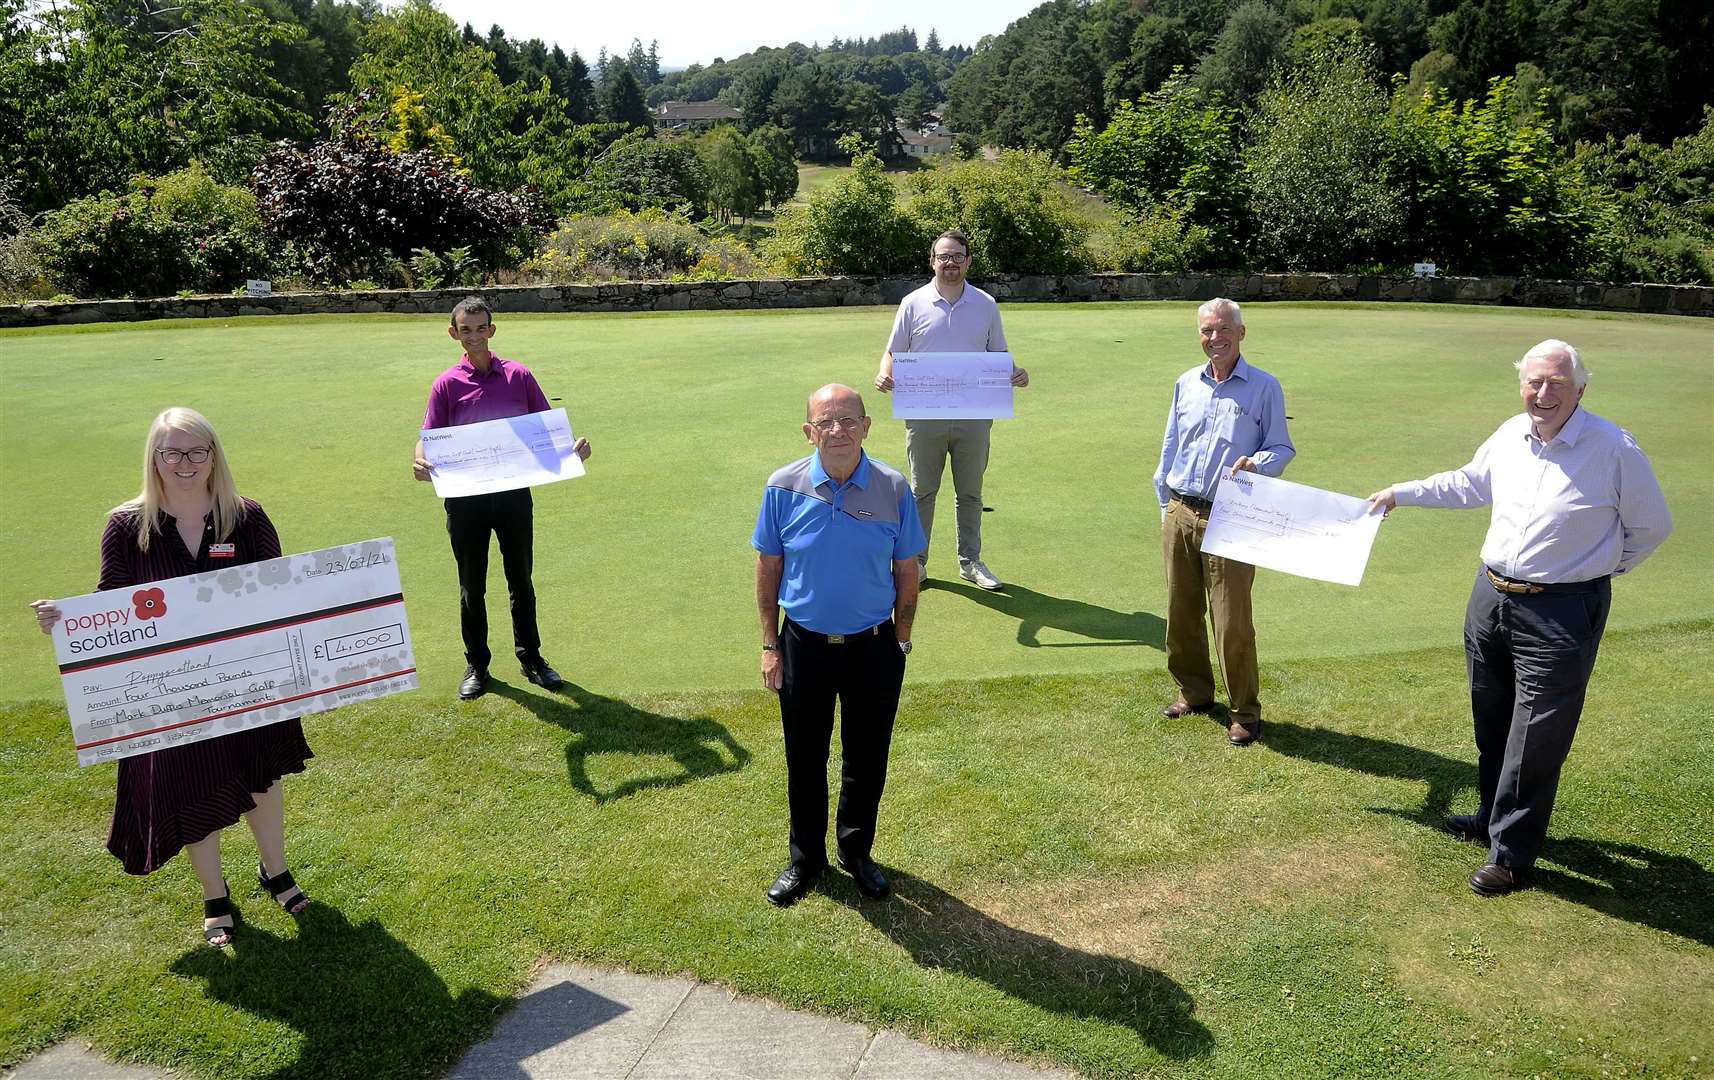 Accepting the cheques from Albert Duffus (centre) are (from left) Frances Beveridge for Poppy Scotland, Colin Mackay for Forres Junior Golfers, Sean Blacklaw for Forres Golf Club and Graham Hilditch and Seymour Monro for Erskine Leanchoil Trust.